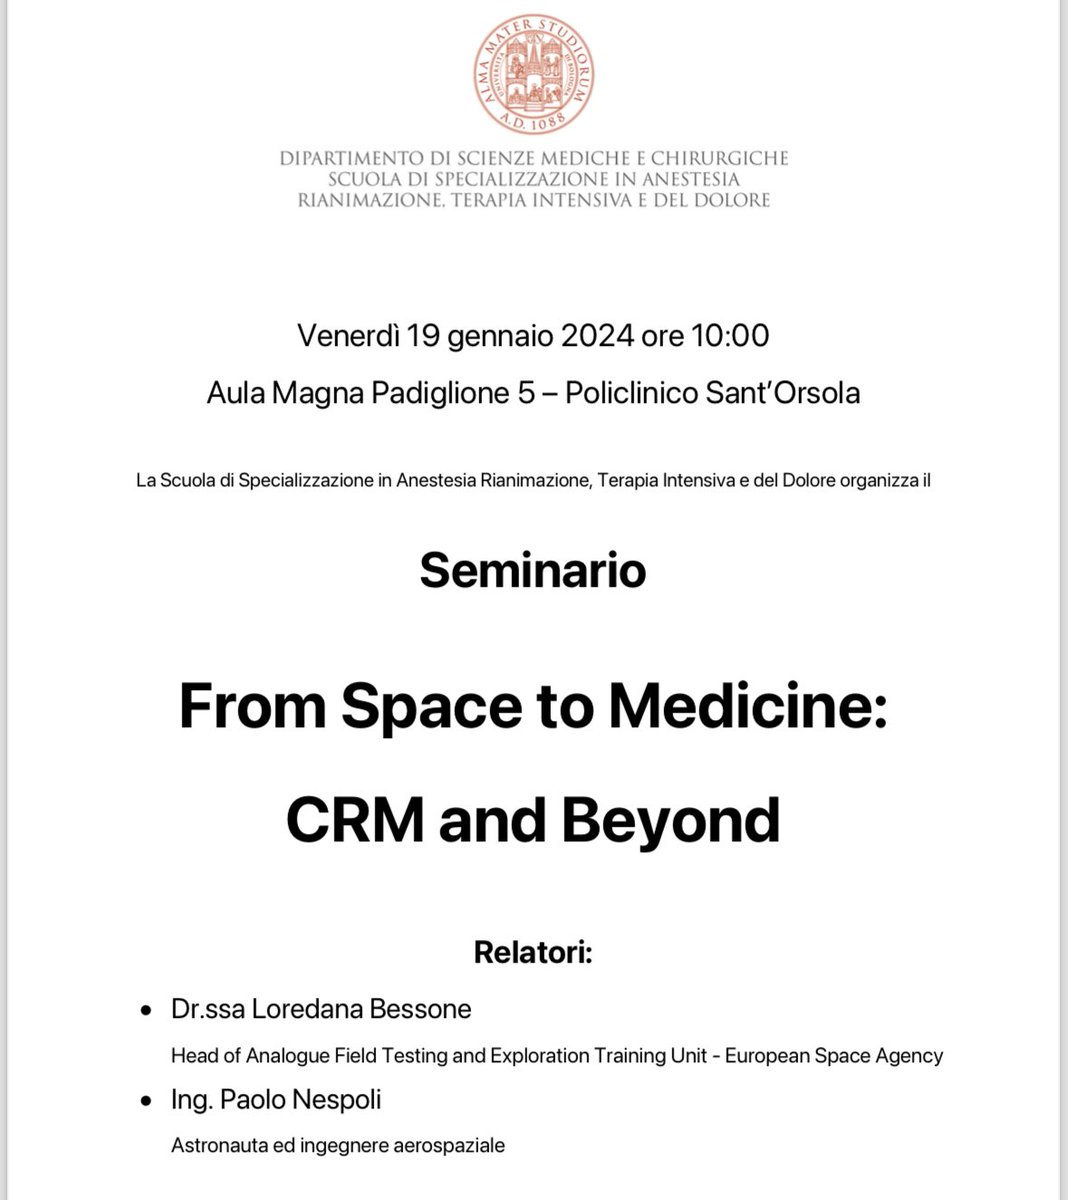 Human factor and CRM in #space and #medicine. This Friday in Bologna with @LoredanaBessone @ESA_CAVES @astro_paolo @carenzmd. Don’t miss it!!